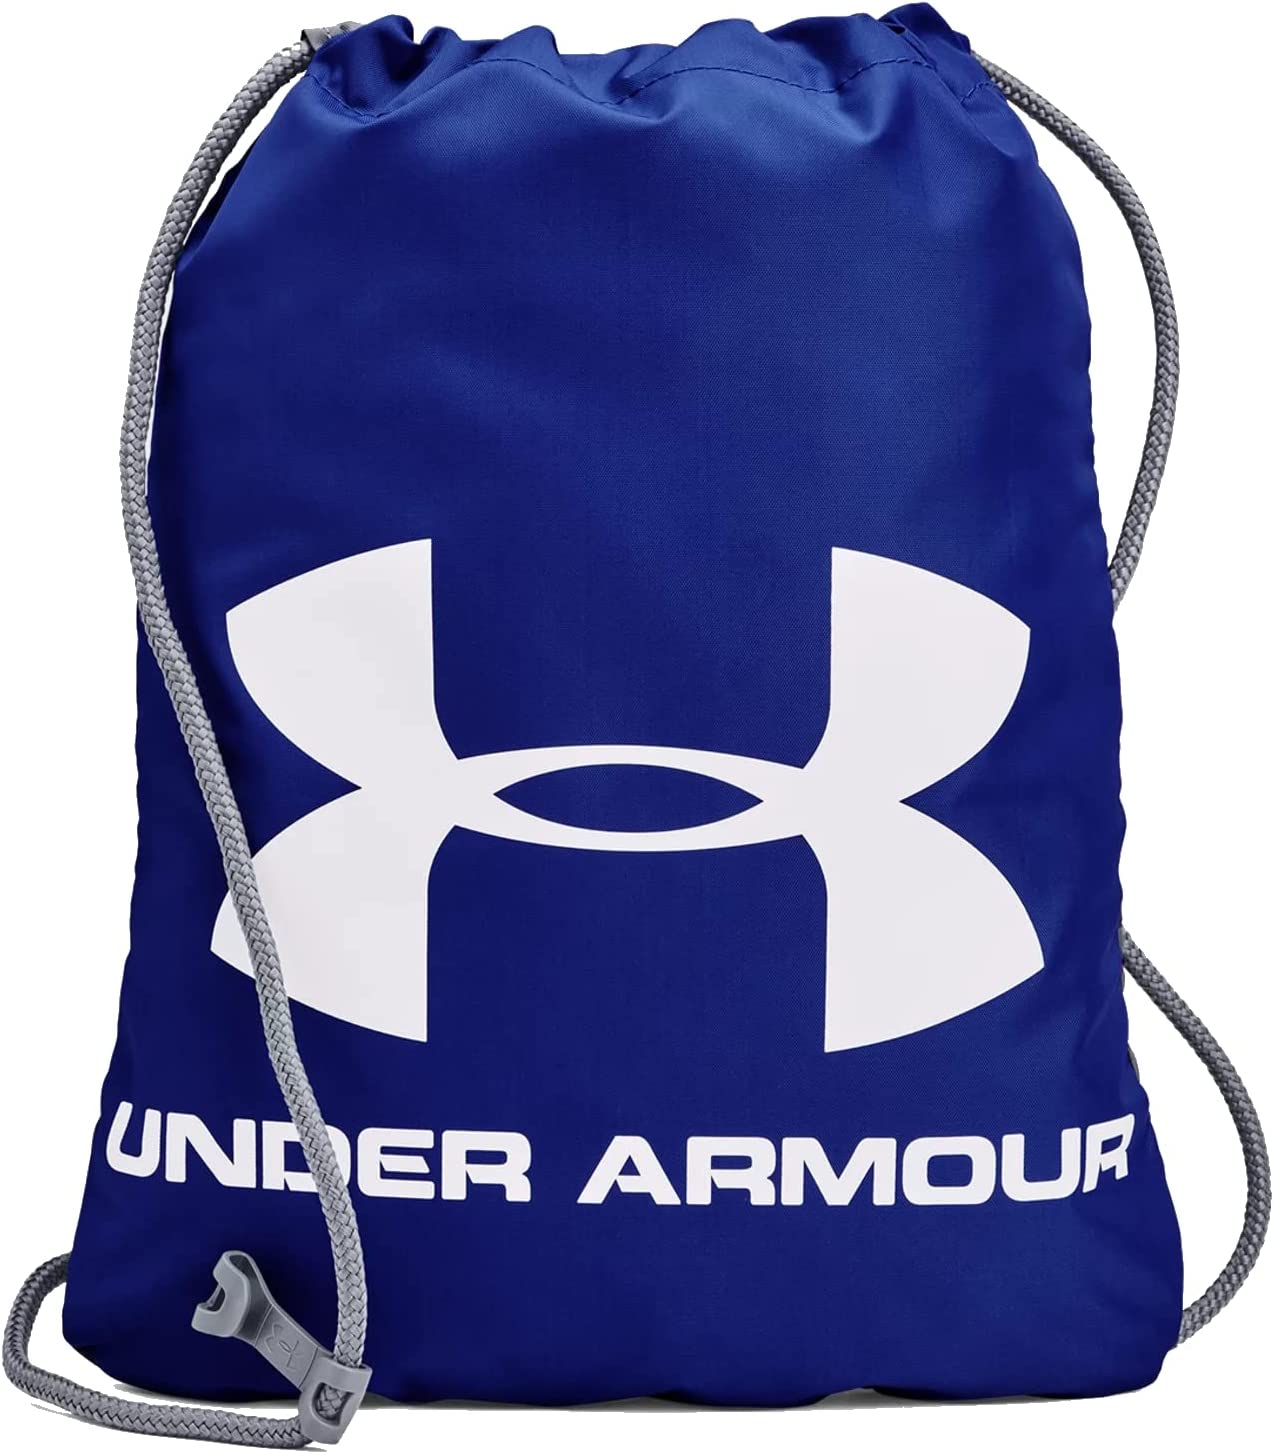 Under Armour Unisex Ozsee Sackpack Bag - Royal Blue/White, One Size